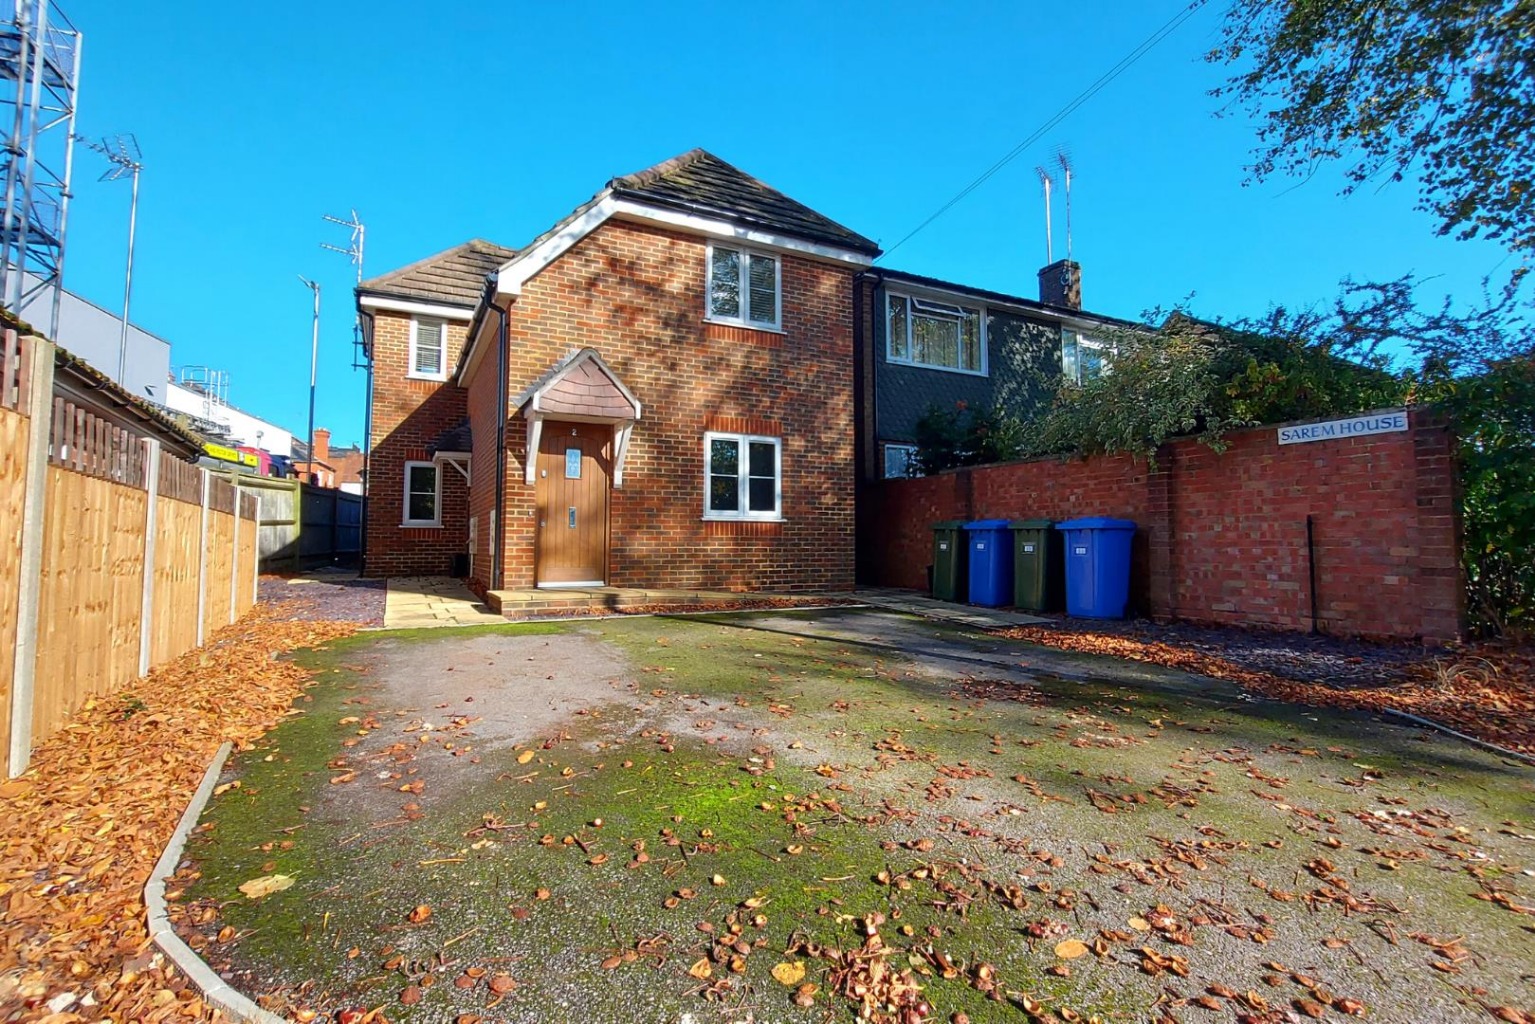 This is an ideal maisonette for a first-time buyer or investor looking for a property that is ready to move into instantly whilst being just a couple of minutes walk from Crowthorne High Street.